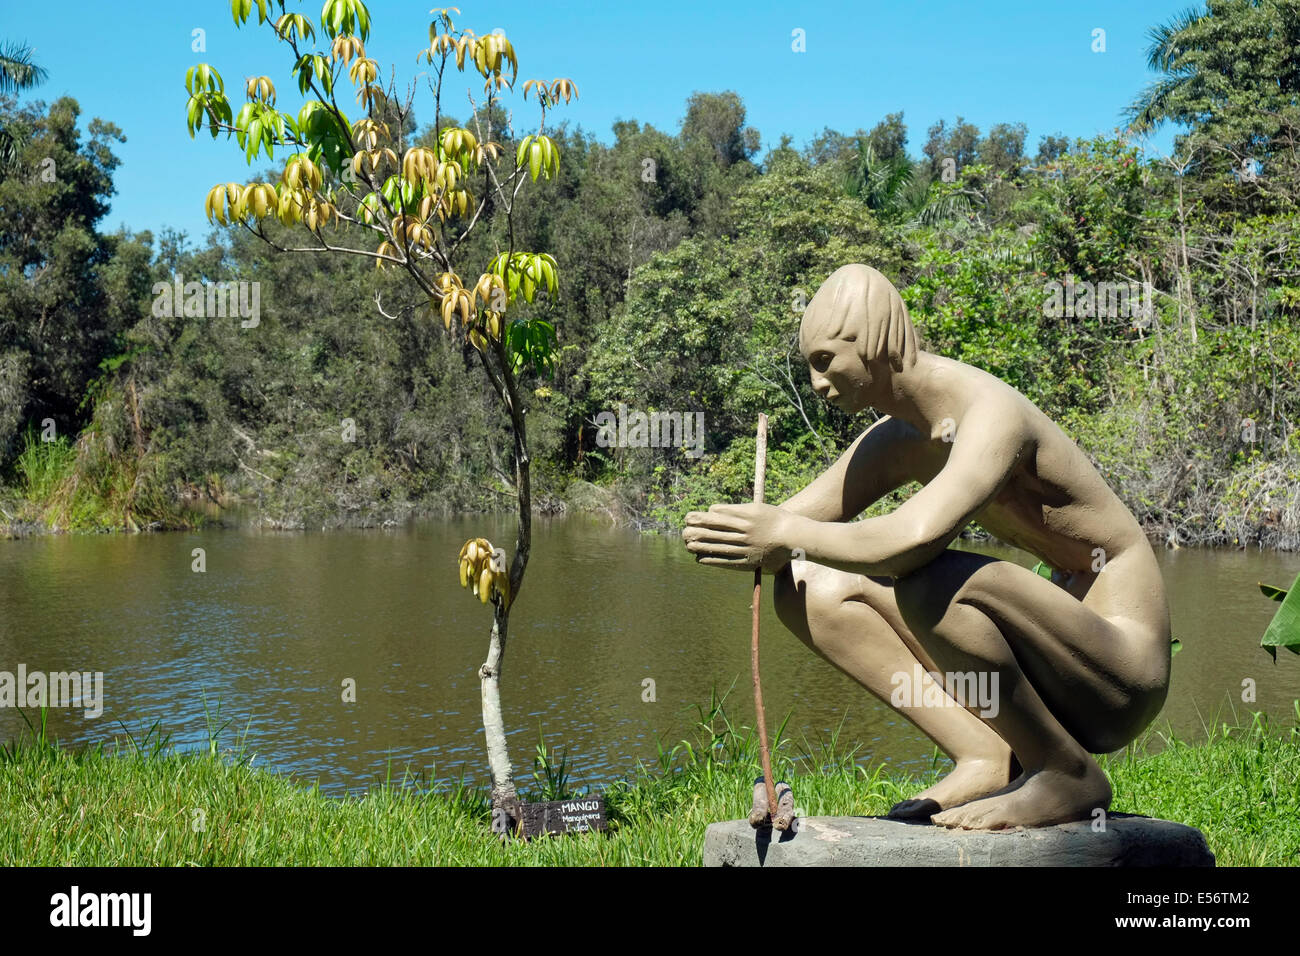 Sculpture of a boy lighting a fire at the reconstructed Indian village at Guamá on the Zapata swamp, Cuba. Stock Photo